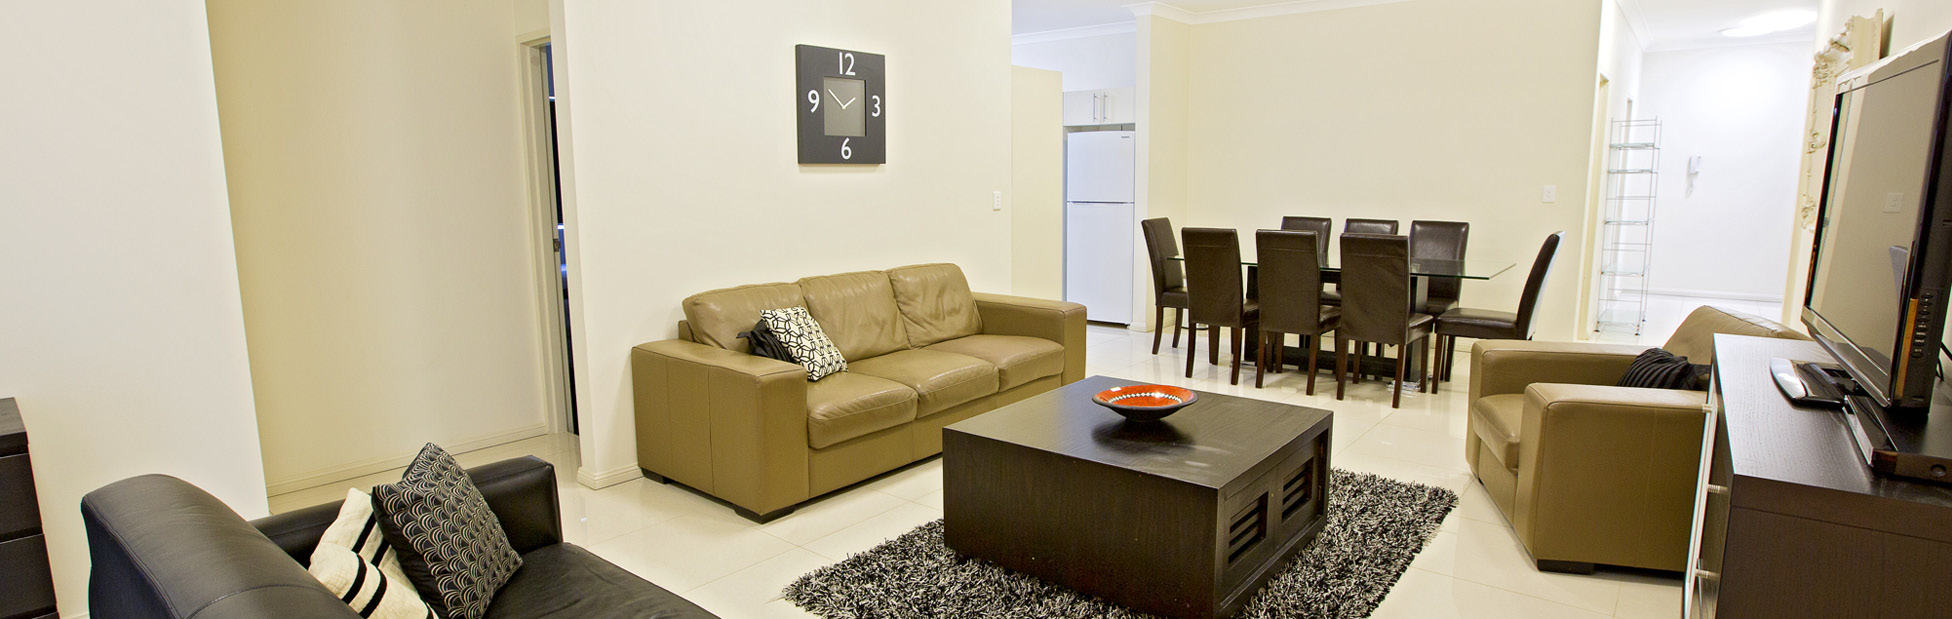 Living room with lounge, coffee table, TV on a unit and a dining table set with chairs.